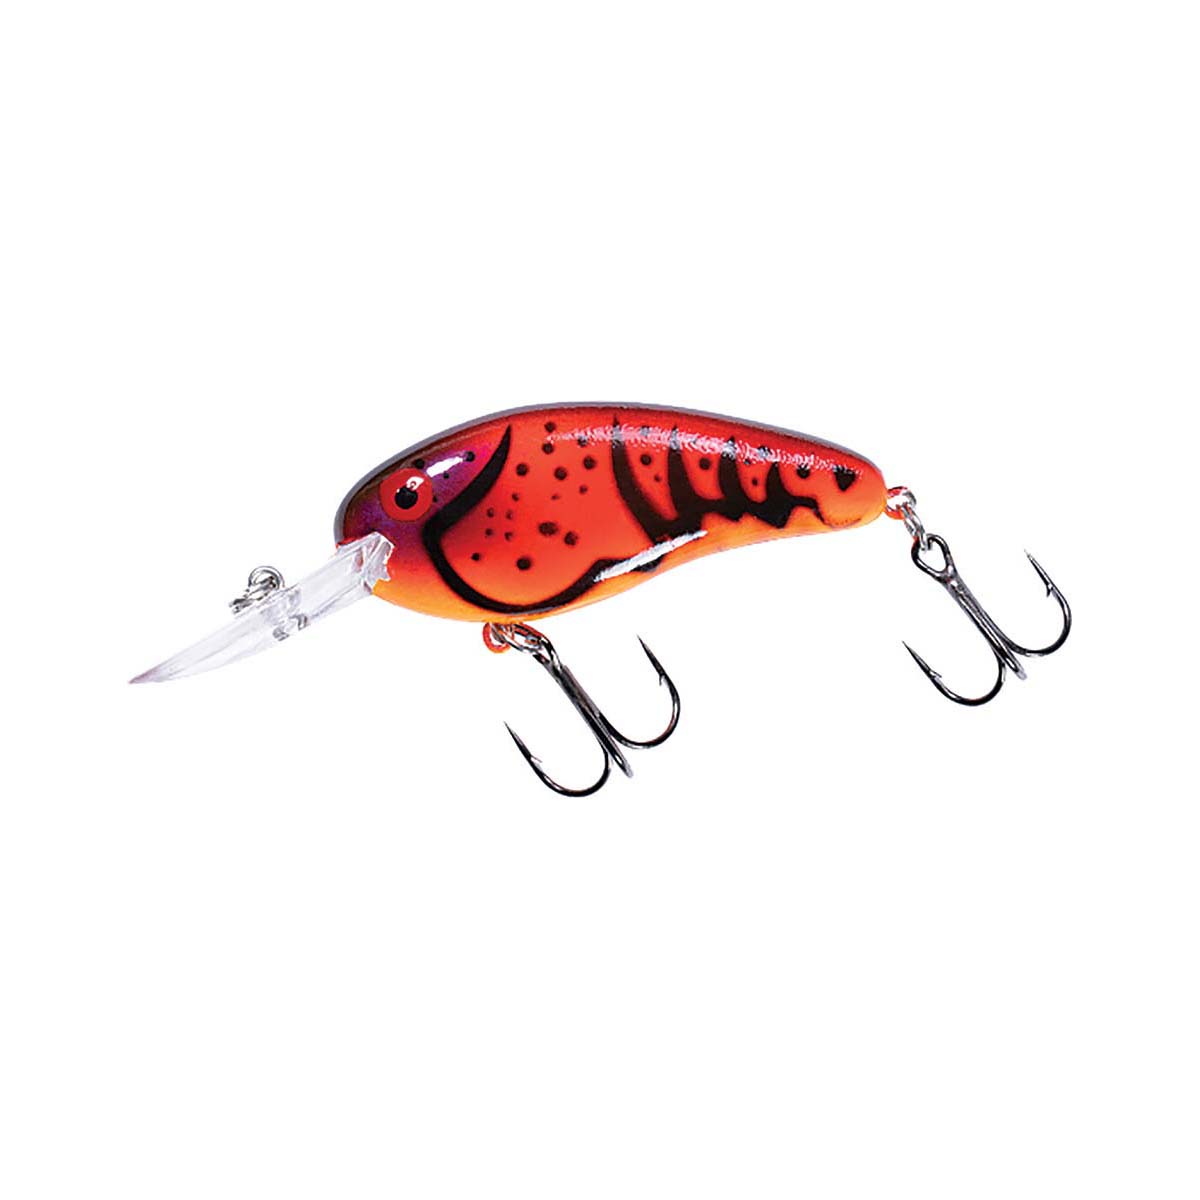 Bomber Deep Flat A Hard Body Lure 63mm Mad Craw